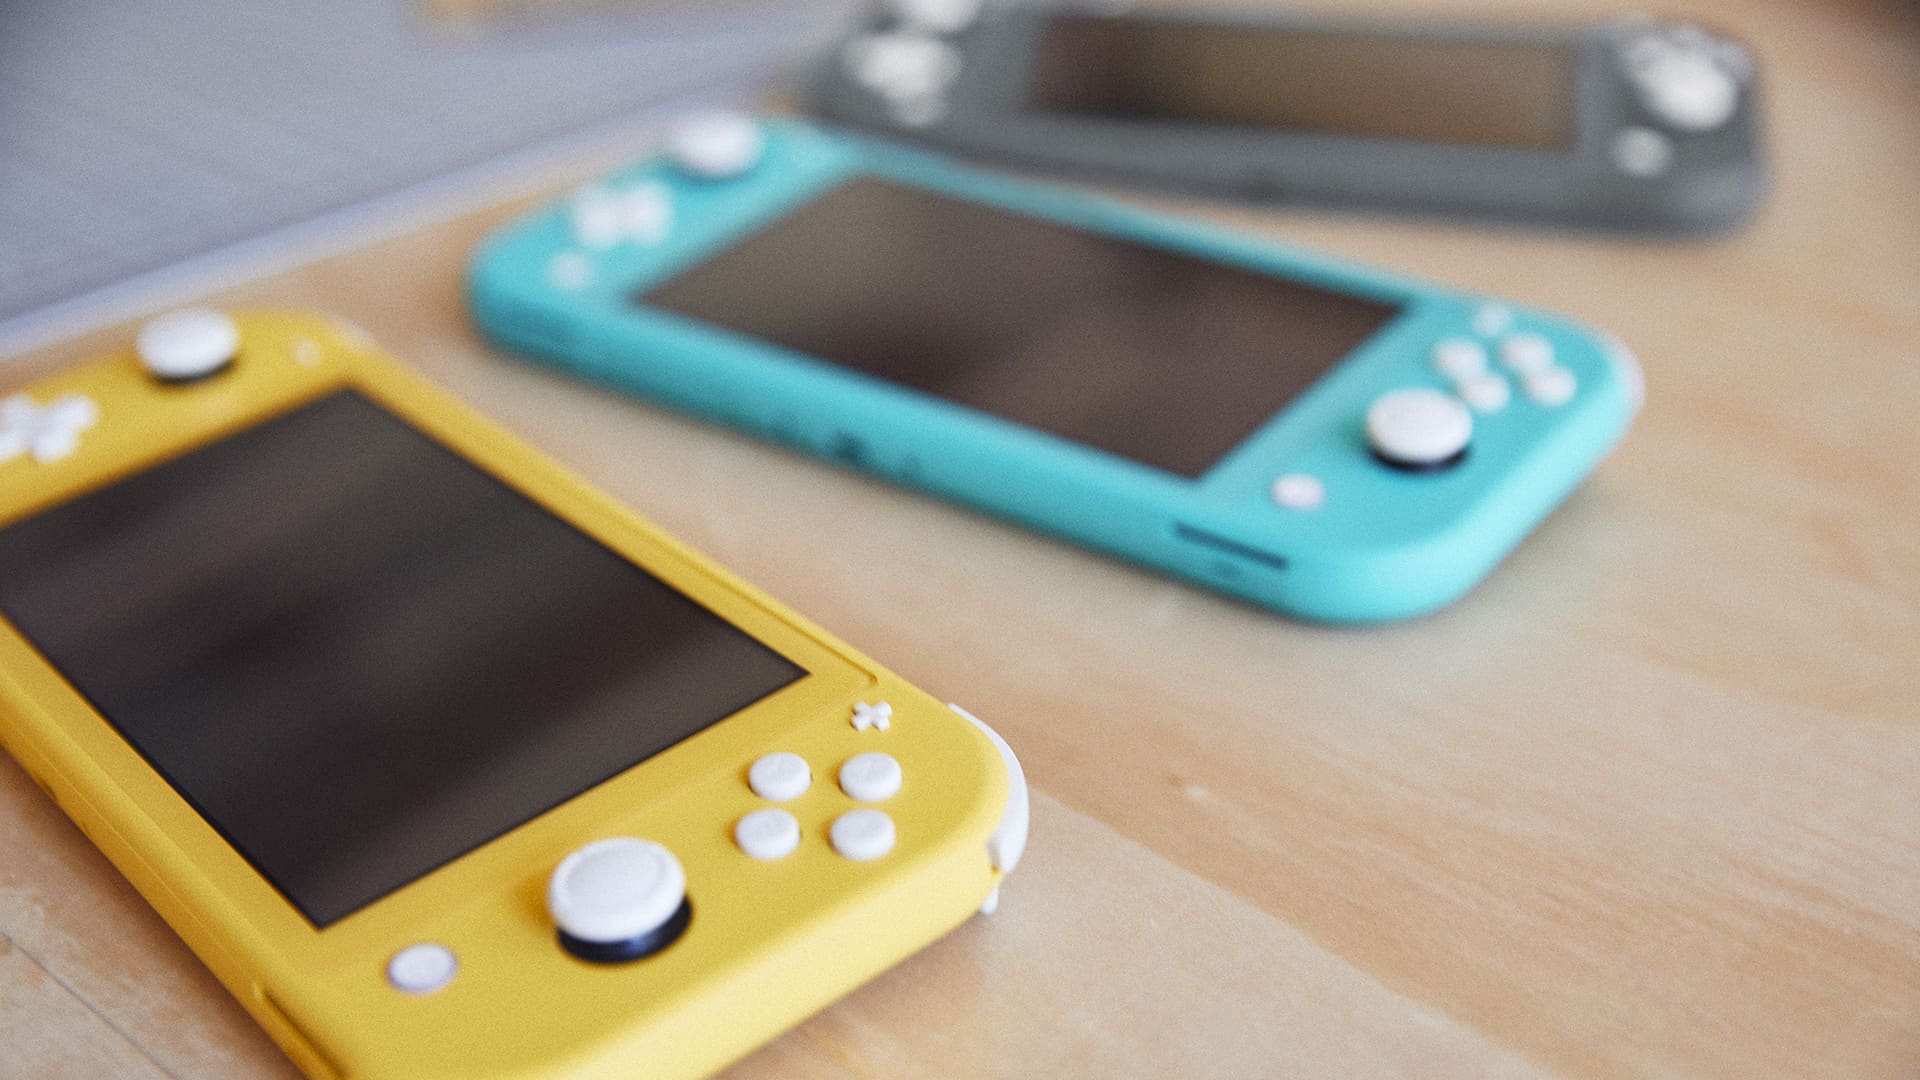 owning a switch and switch lite